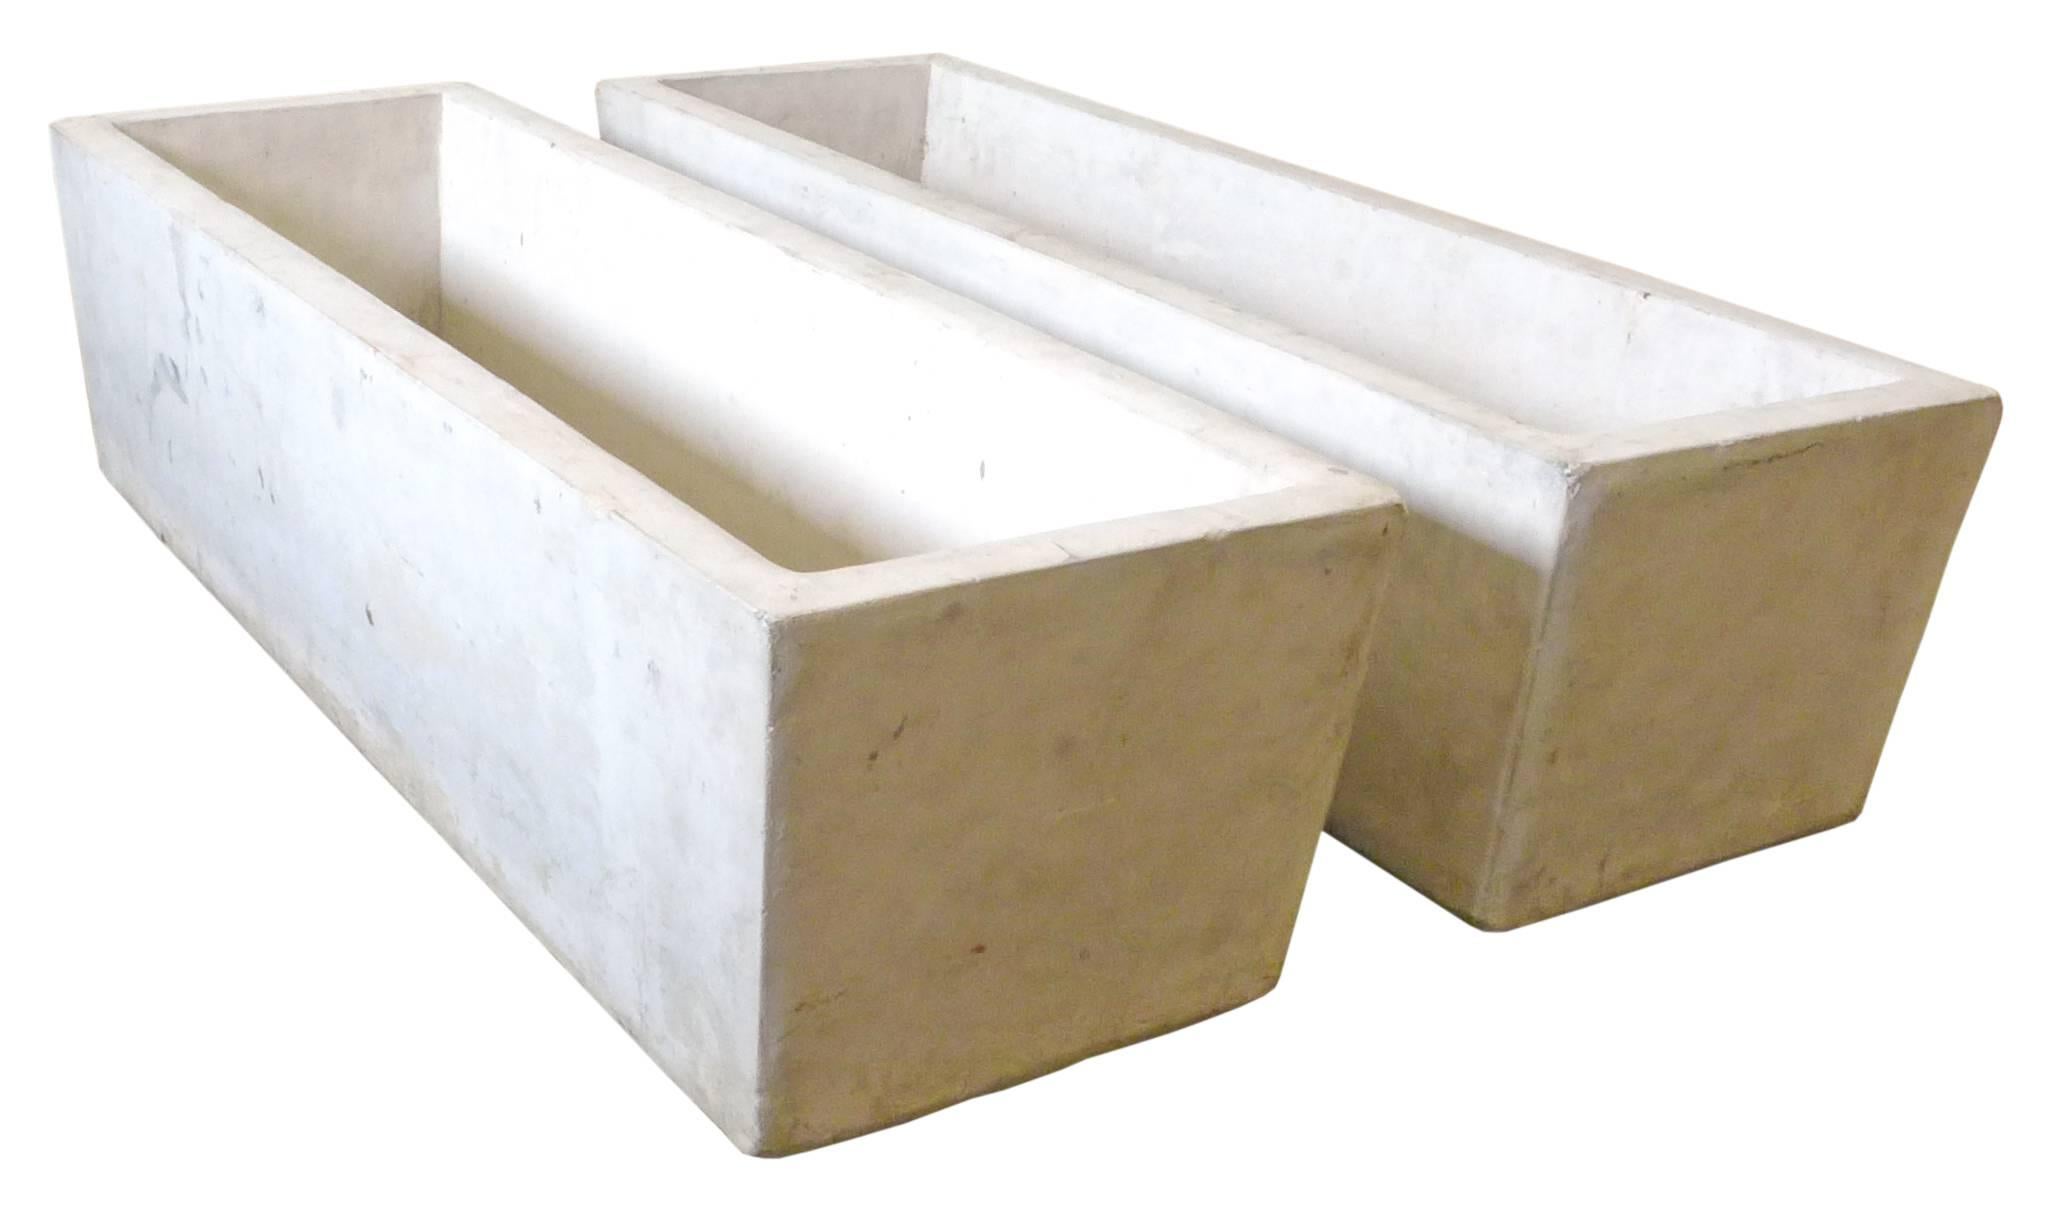 A fantastic pair of architectural, cast-stone planters. Substantial, thick-walled, trapezoidal forms in a pale oatmeal hue. A classic garden element, an impressive matched pair great for use indoors or out.